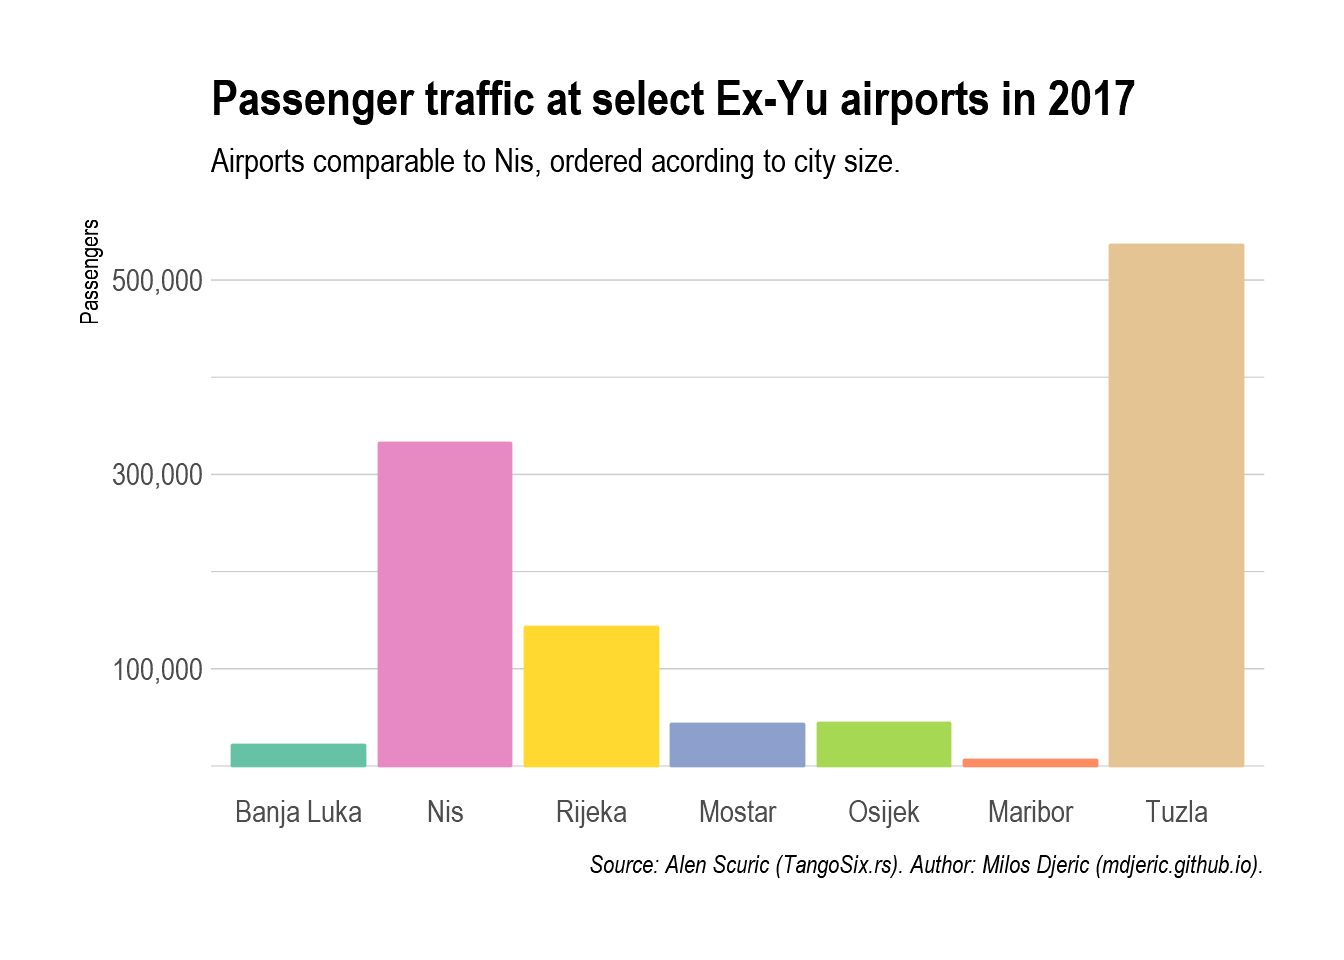 Barchart with passenger traffic in 2017 compared at airports for cities with similar size in the region, Nis stands out with more than 300,000 and Tuzla with more than 500,000